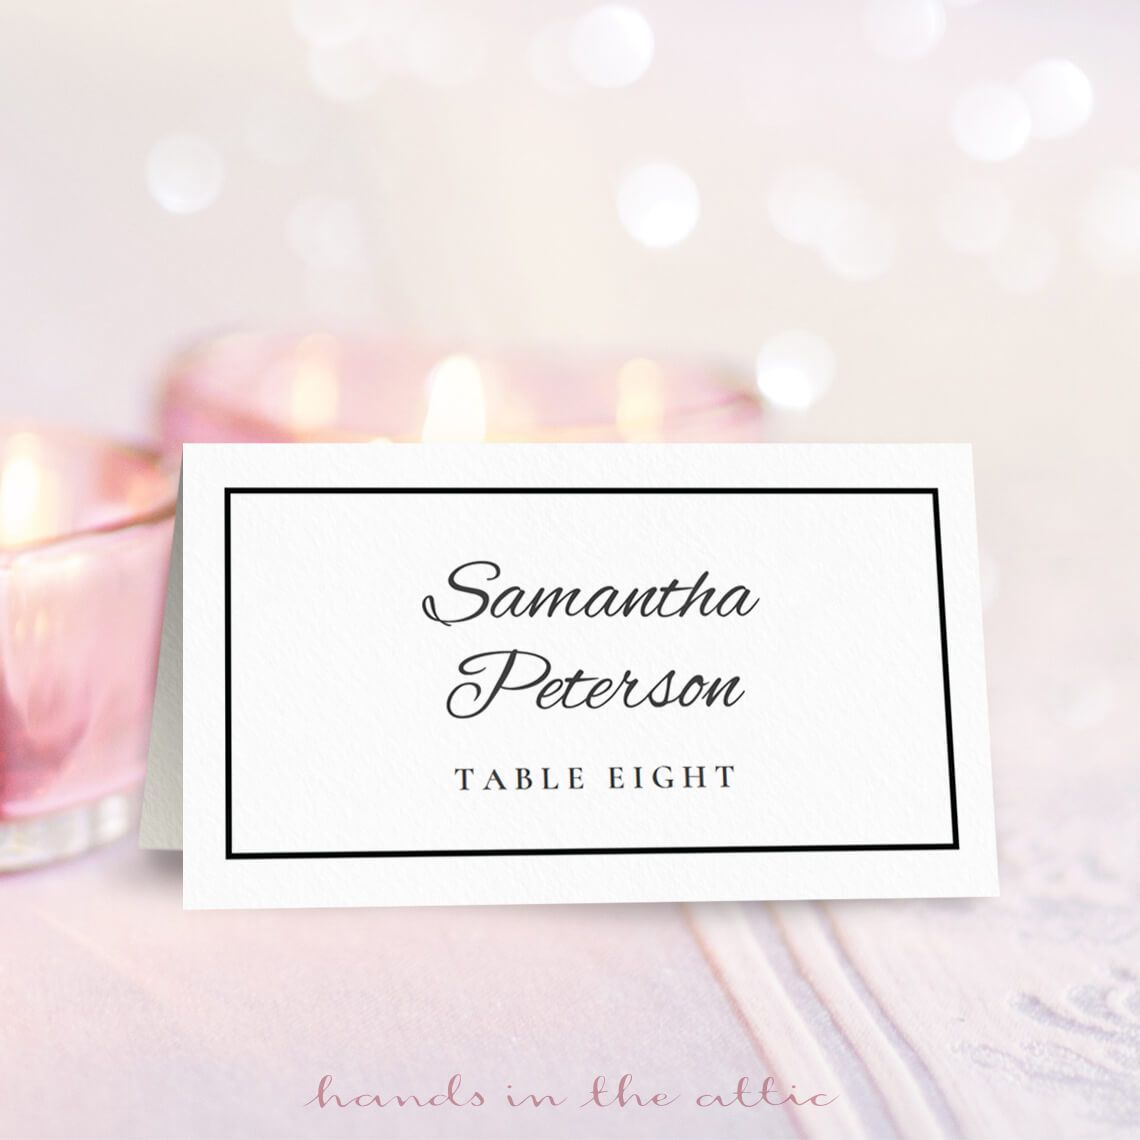 8 Free Wedding Place Card Templates Throughout Table Reservation Card Template